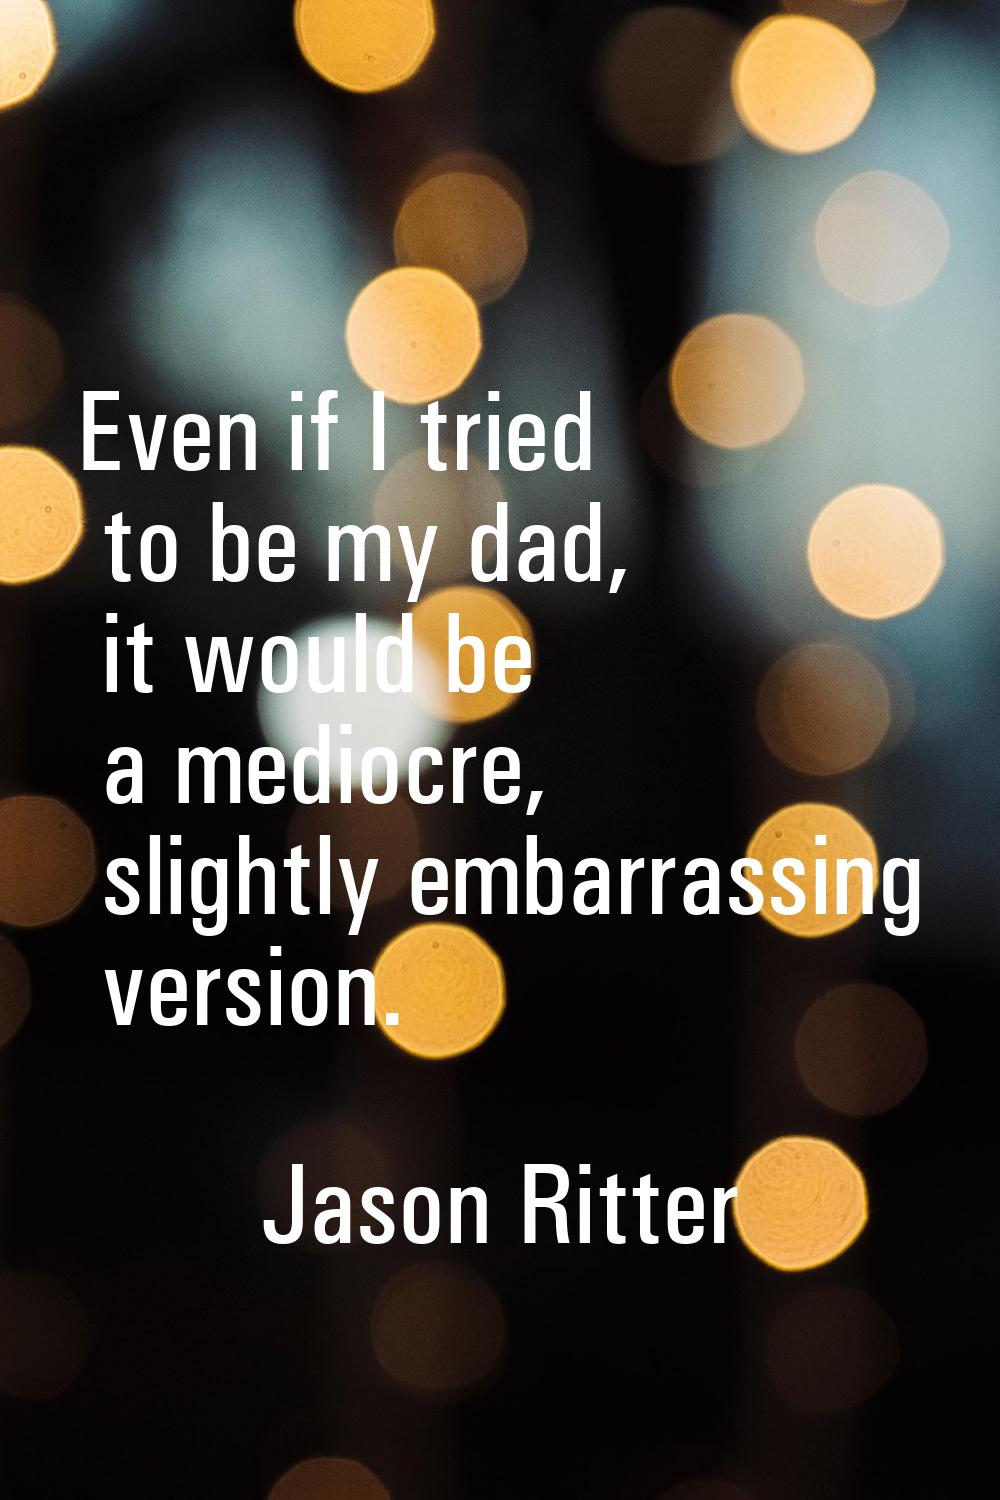 Even if I tried to be my dad, it would be a mediocre, slightly embarrassing version.